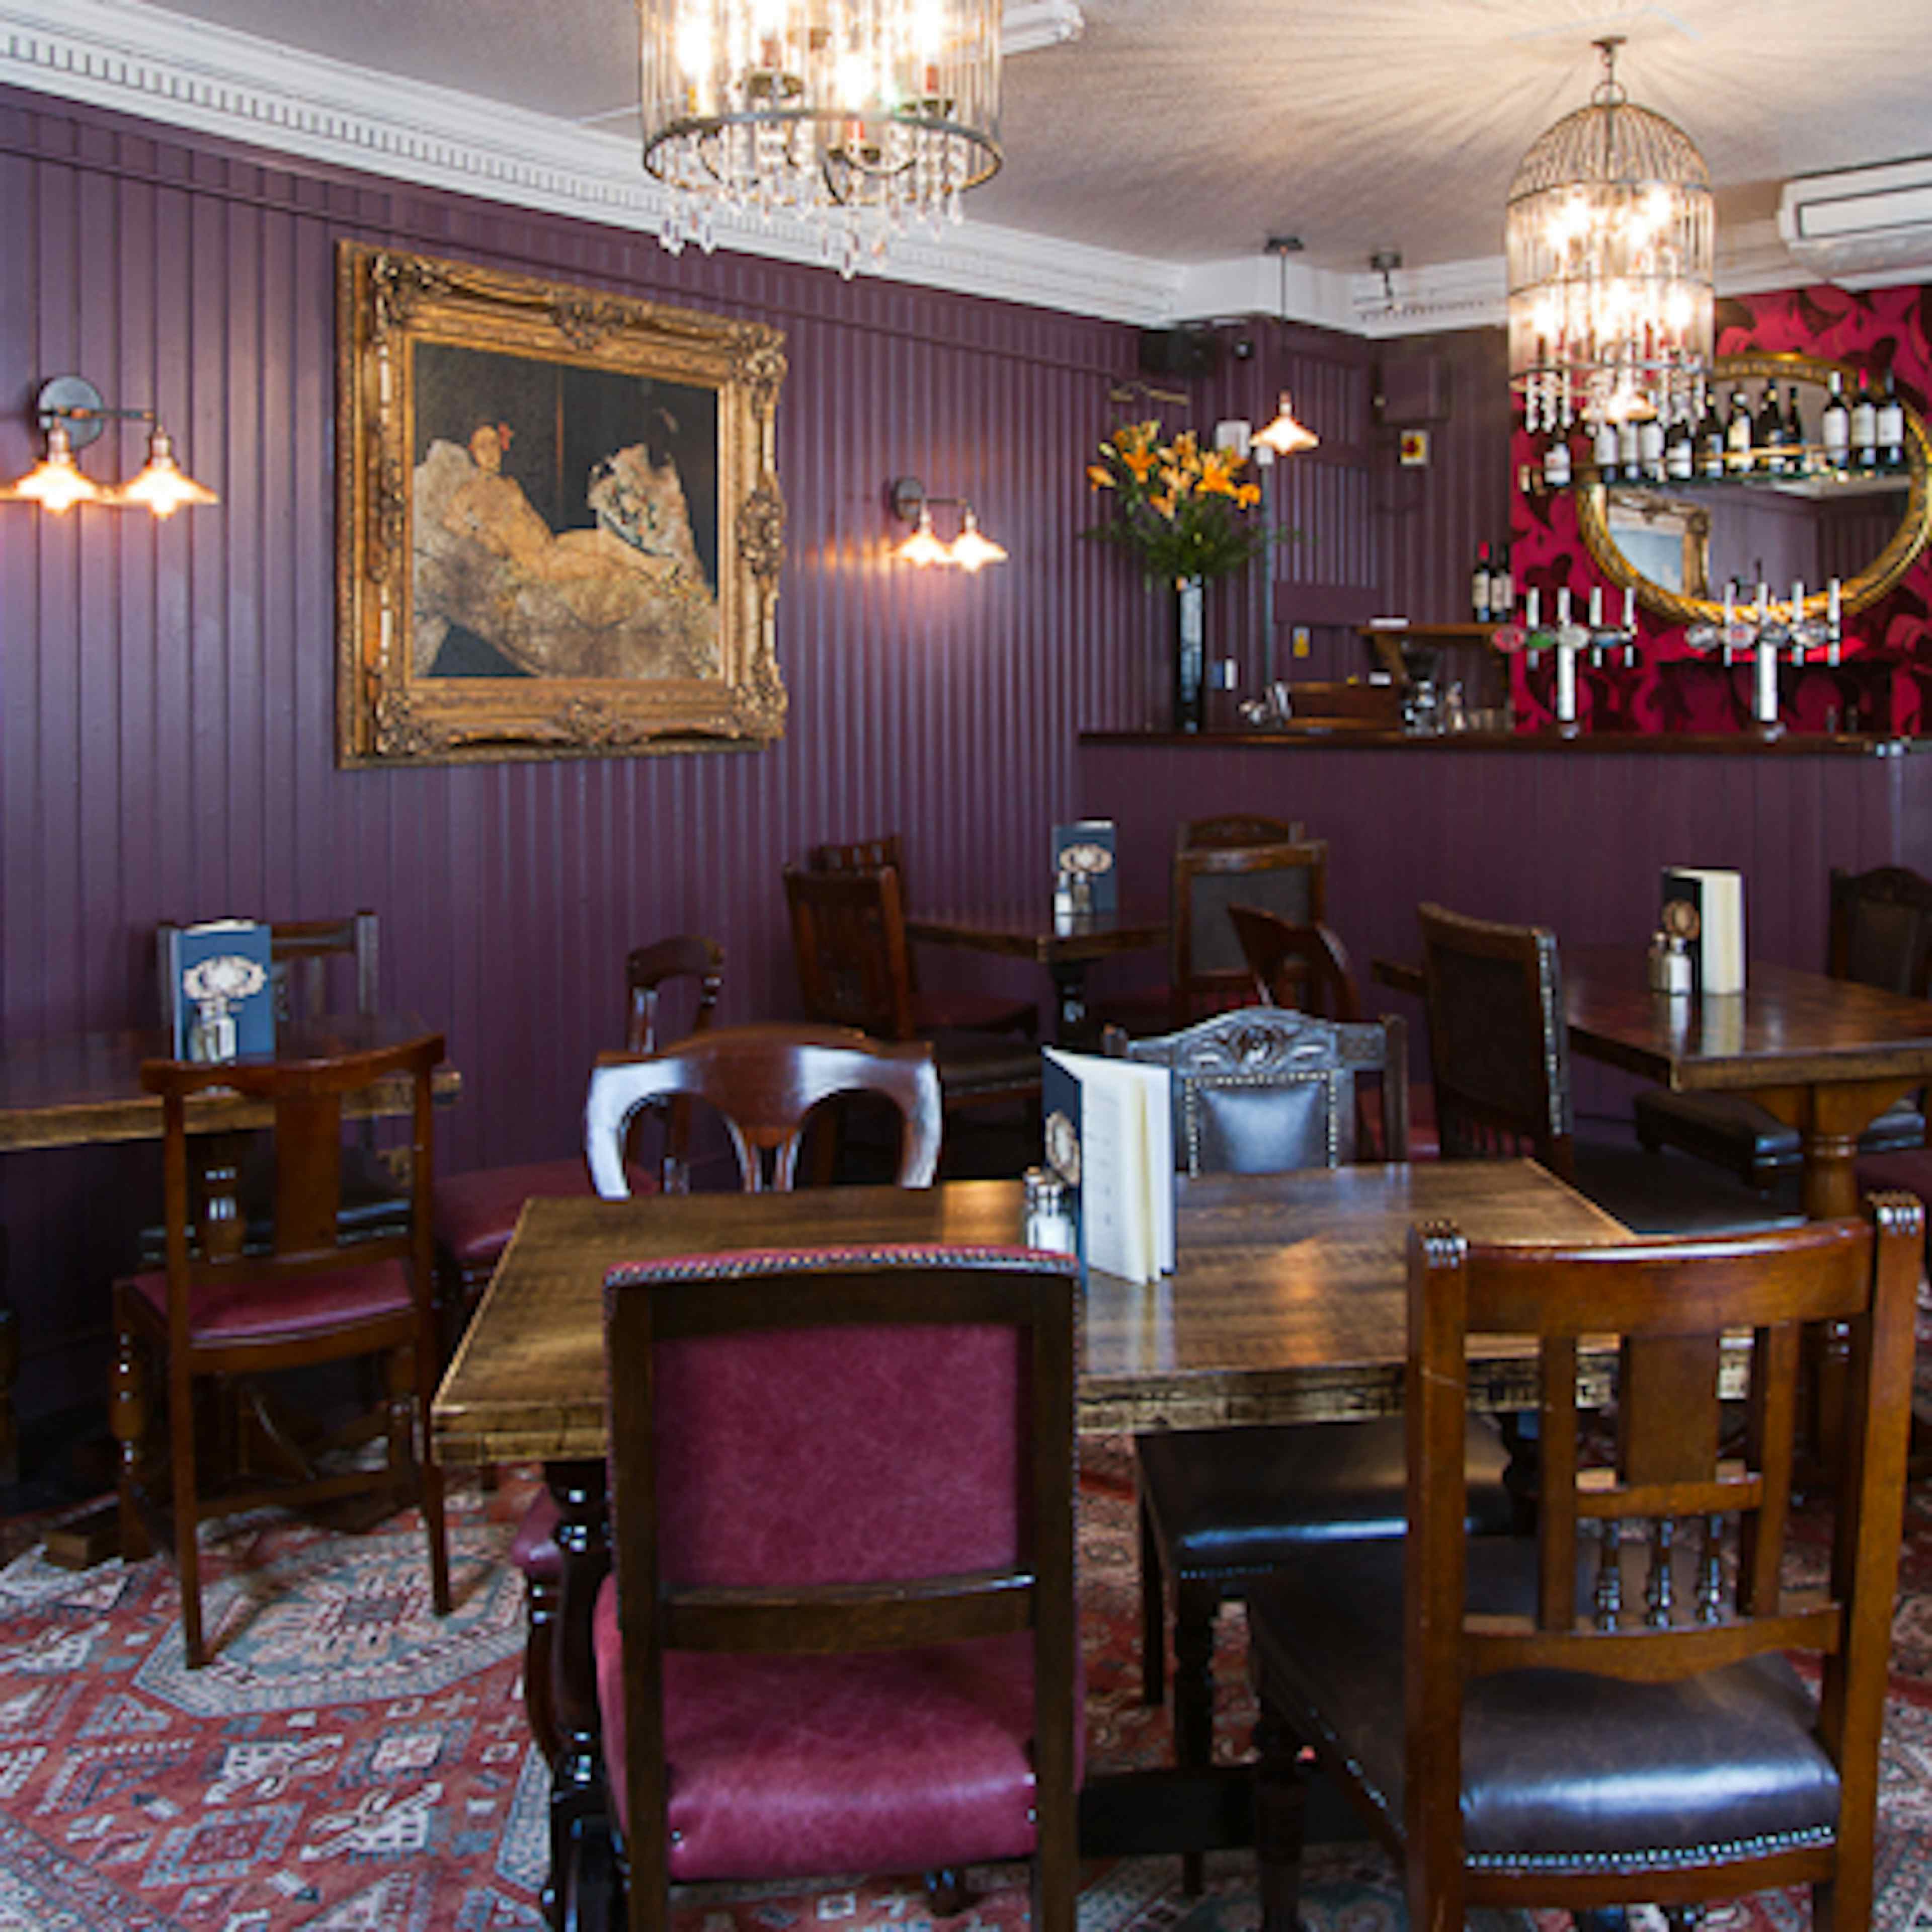 Market Tavern - The Chesterfield Room image 2